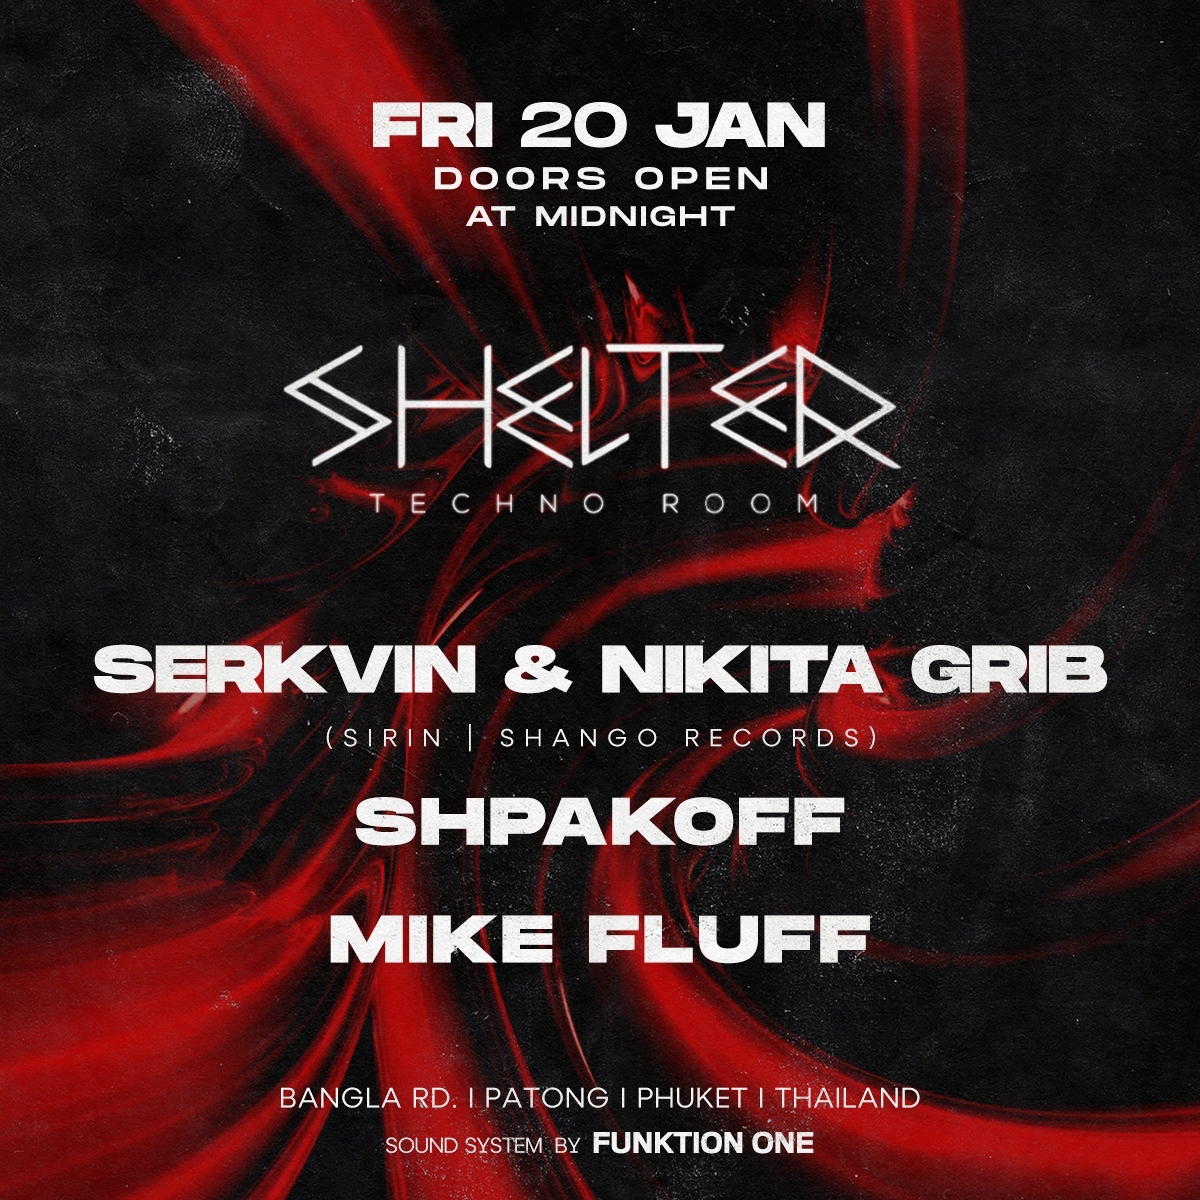 Afterparty at Shelter club